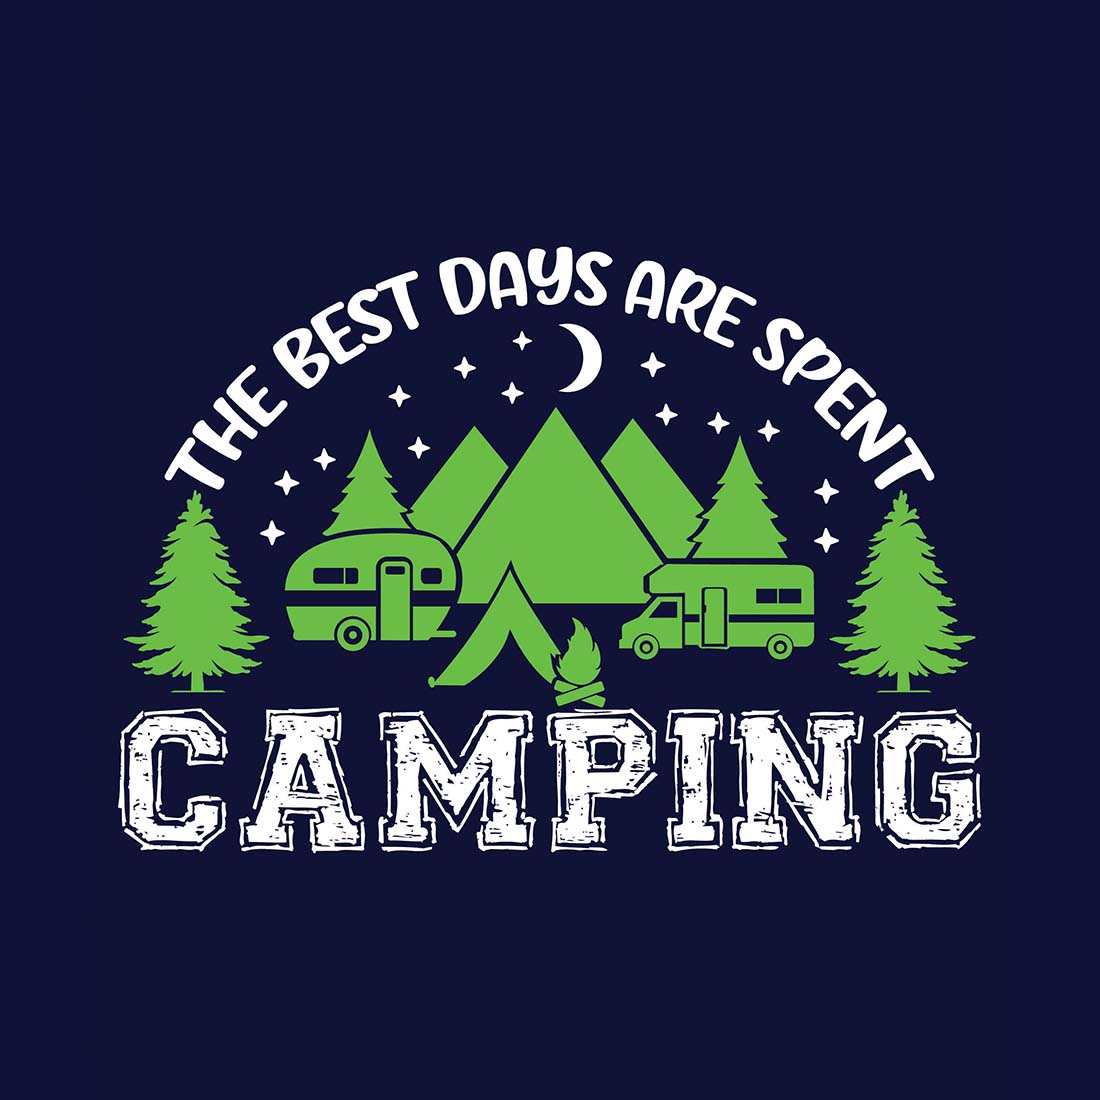 Best Days Are Spent Camping T-Shirt Design | Mountain Hike T-Shirt Design | Ai, Svg, Eps, Dxf, Jpeg, Png, Instant download T-Shirt Digital Prints file cover image.